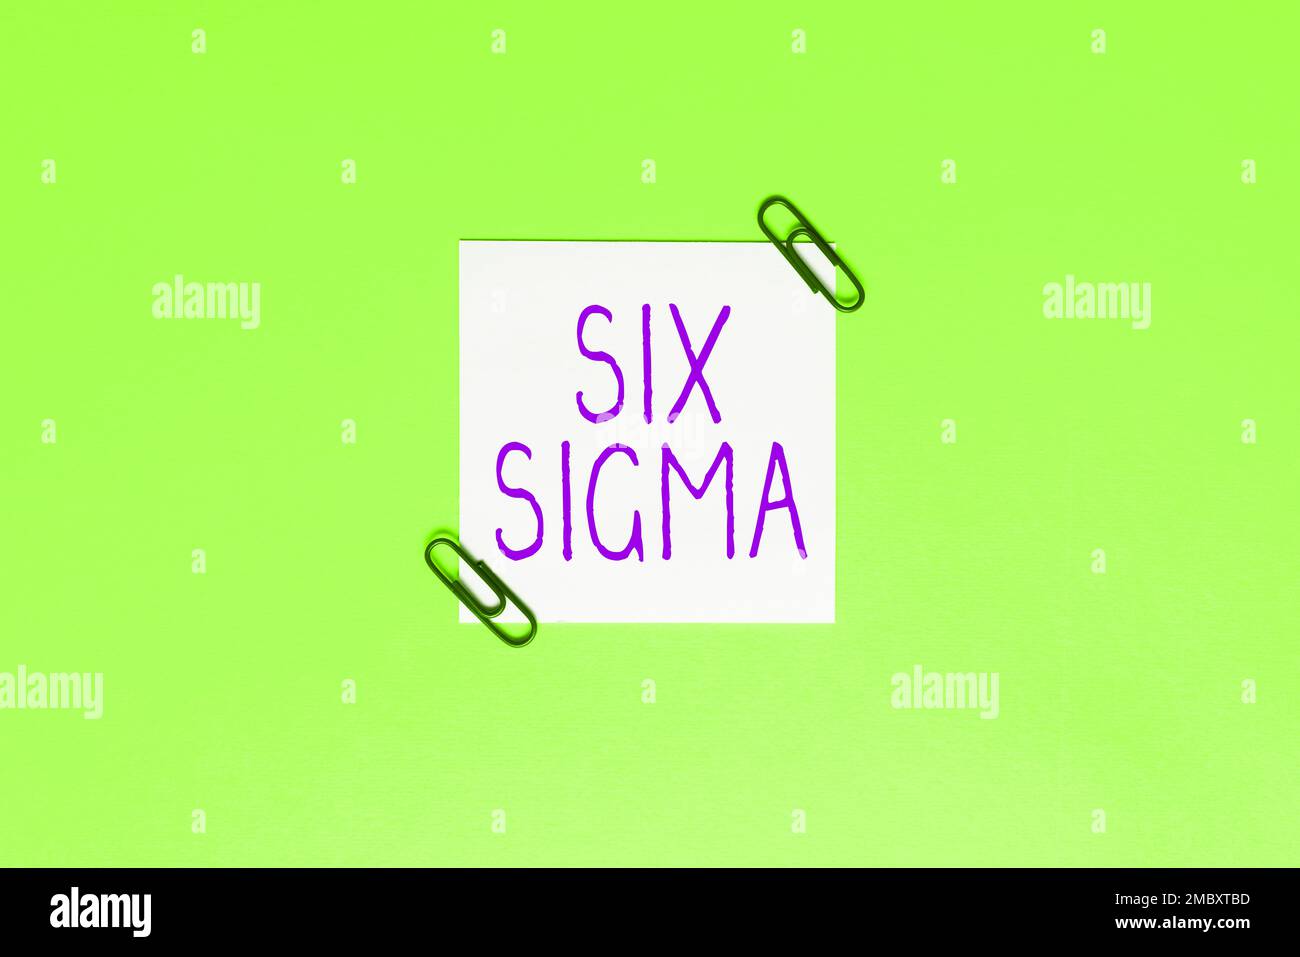 Sign Displaying Six Sigma Business Overview Management Techniques To Improve Business Processes 3402